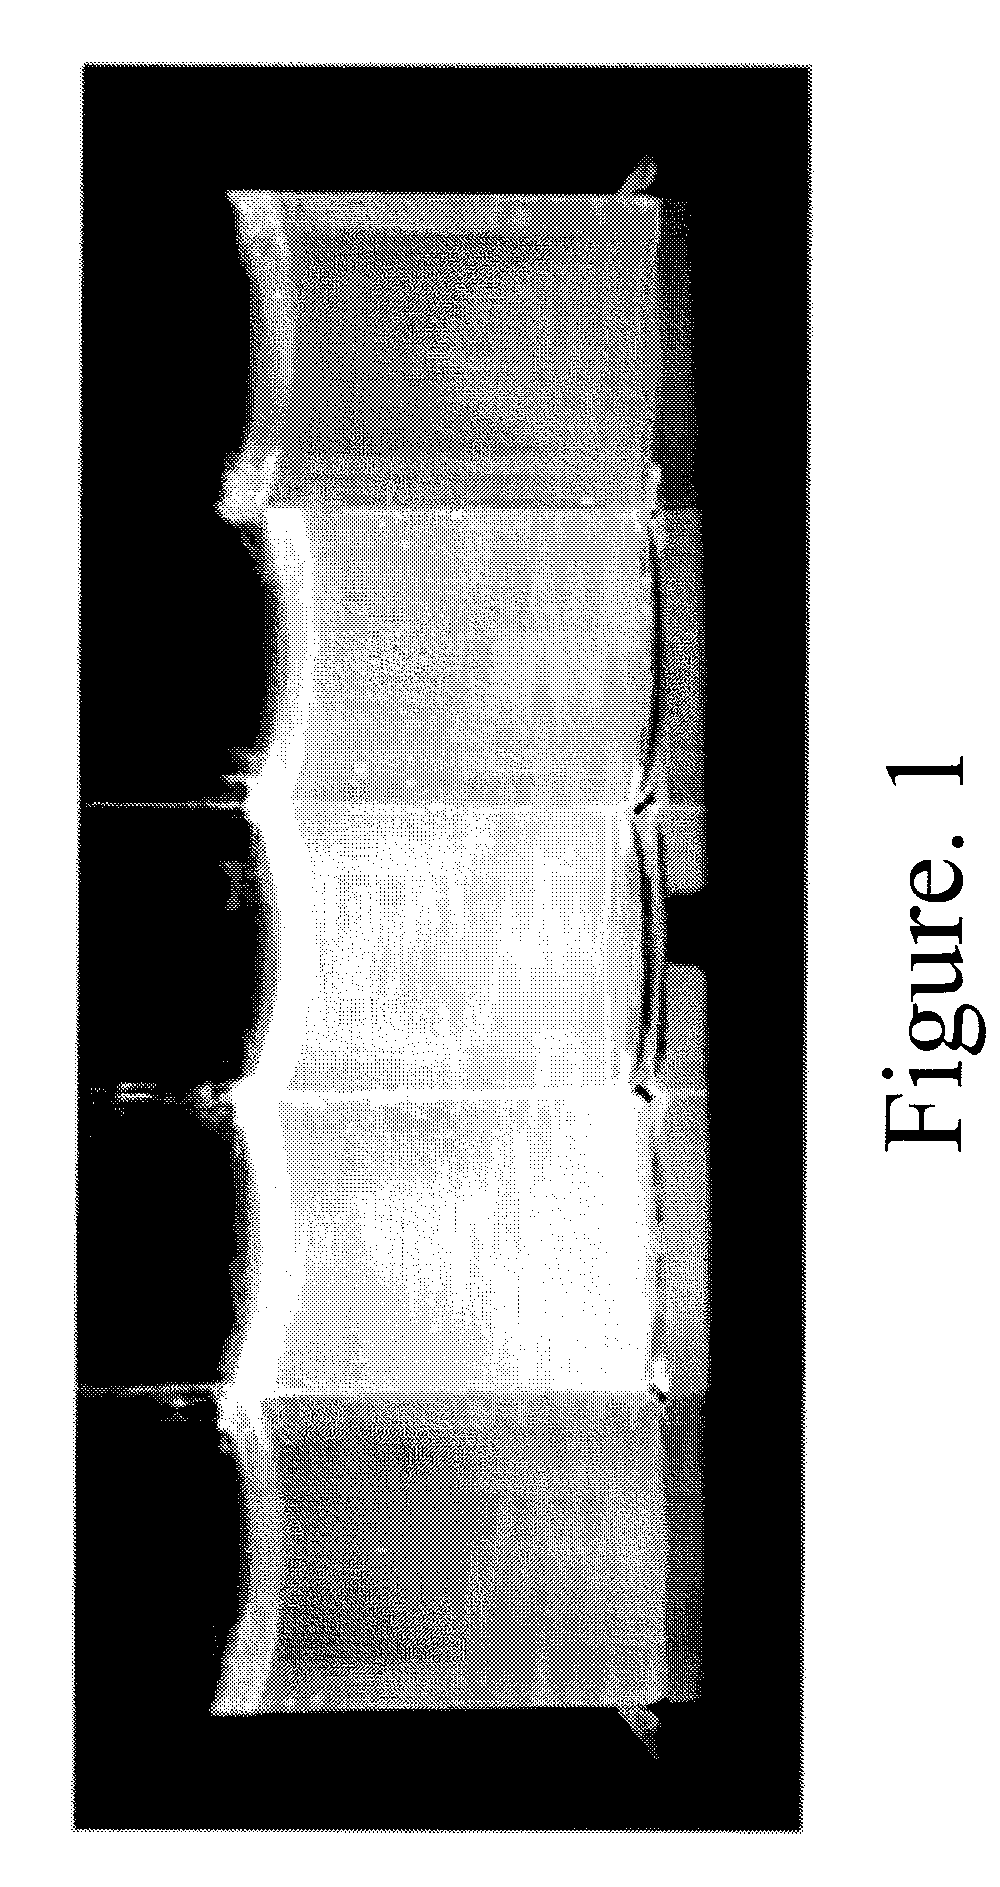 Synthesis of water soluble non-toxic nanocrystalline quantum dots and uses thereof